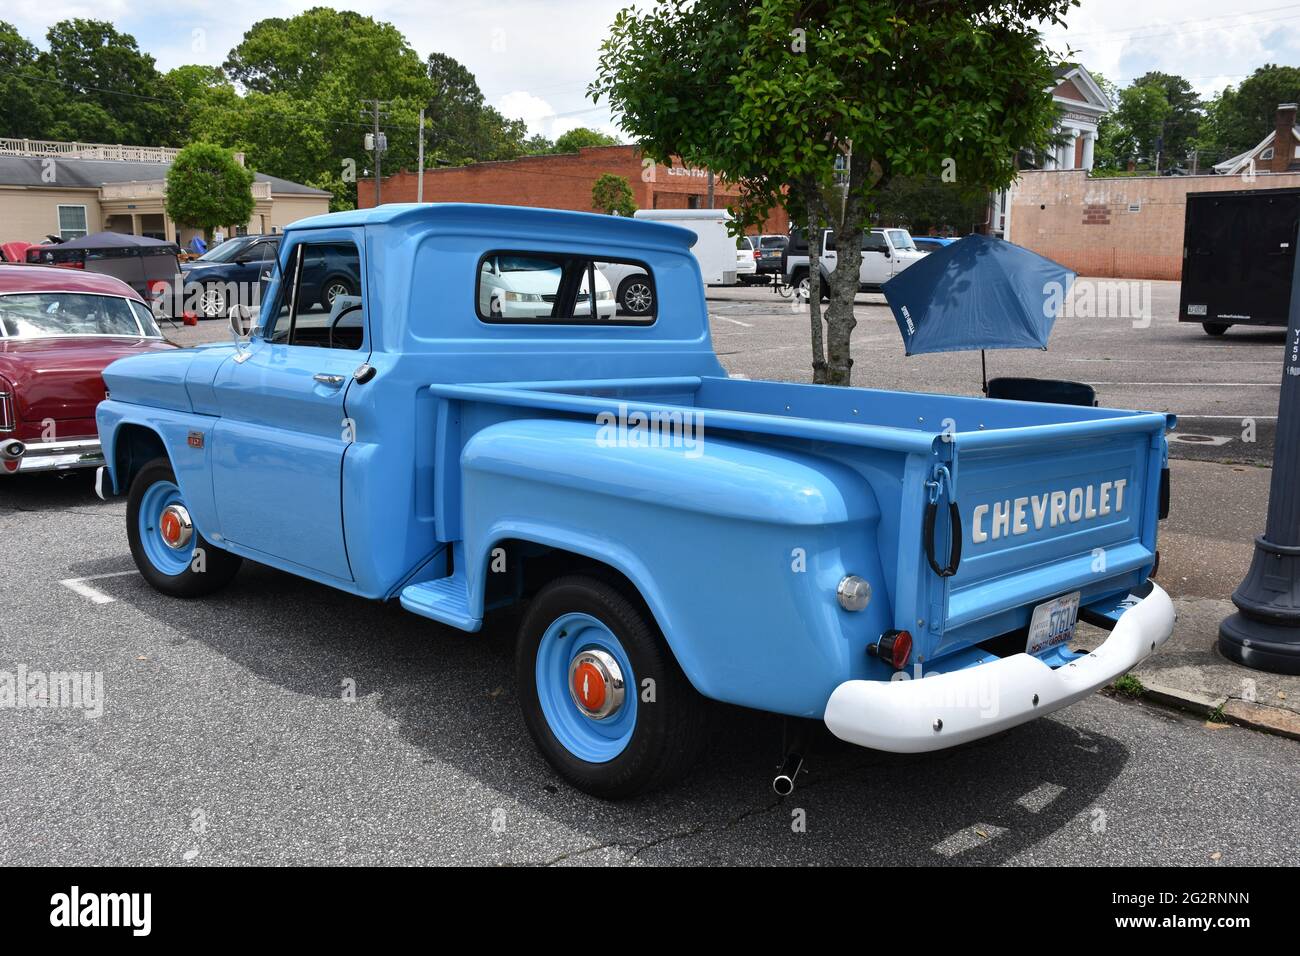 A 1960s Chevrolet Pickup Truck on display at a car show. Stock Photo